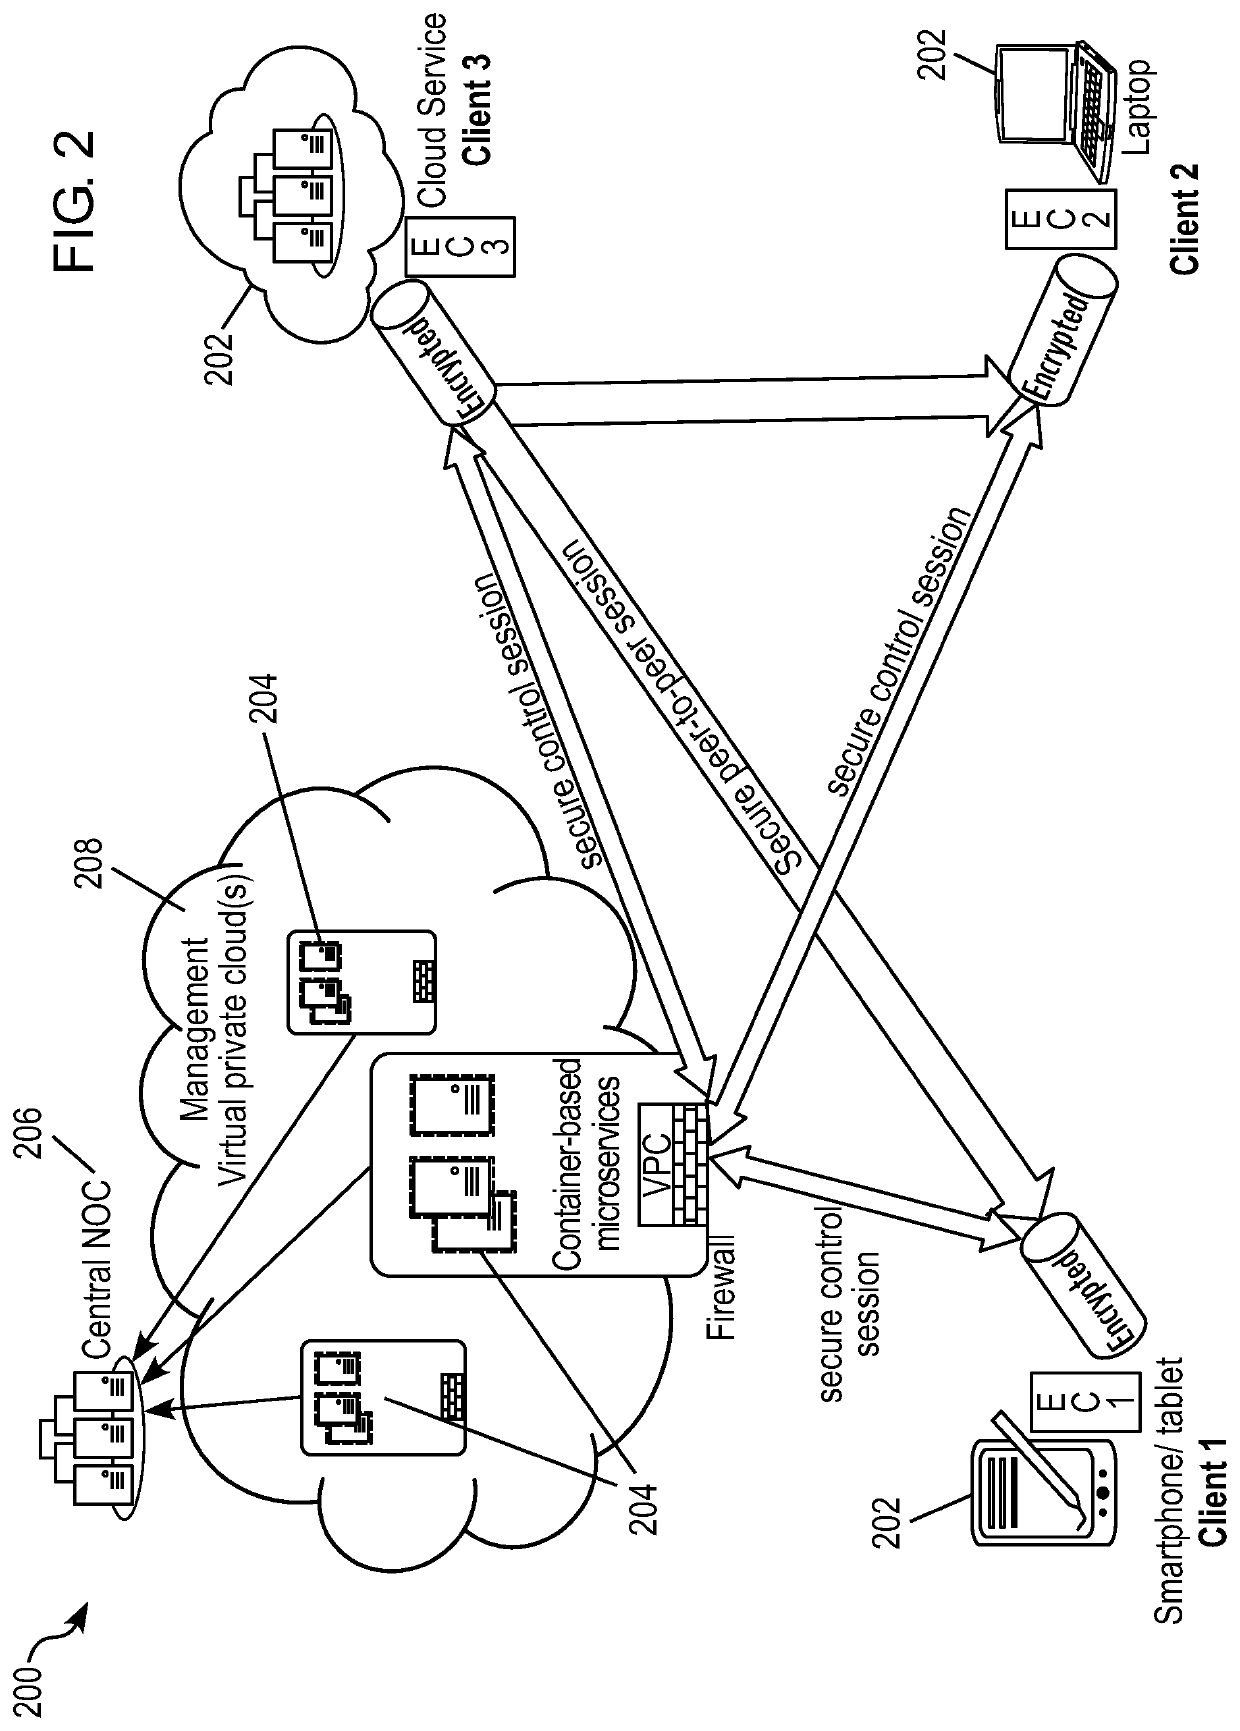 Method and system for secure communications